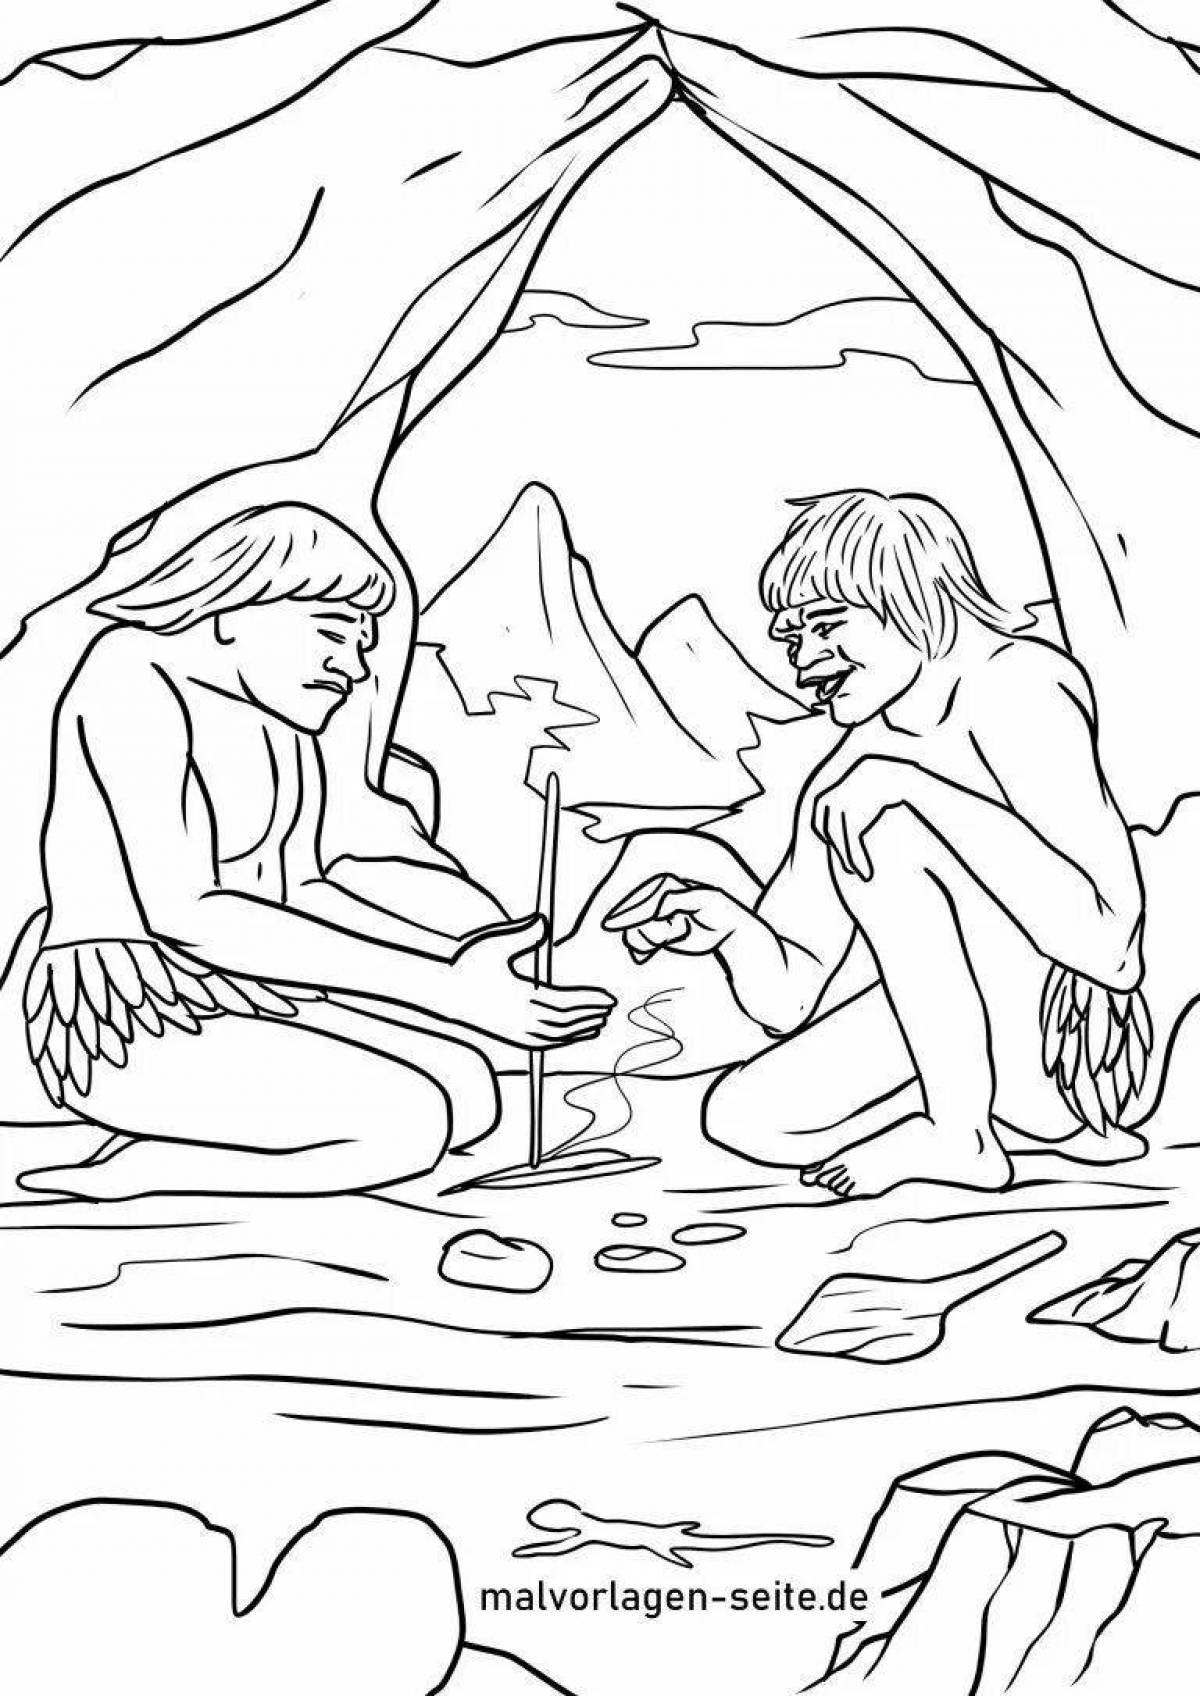 Coloring page magical primitive people